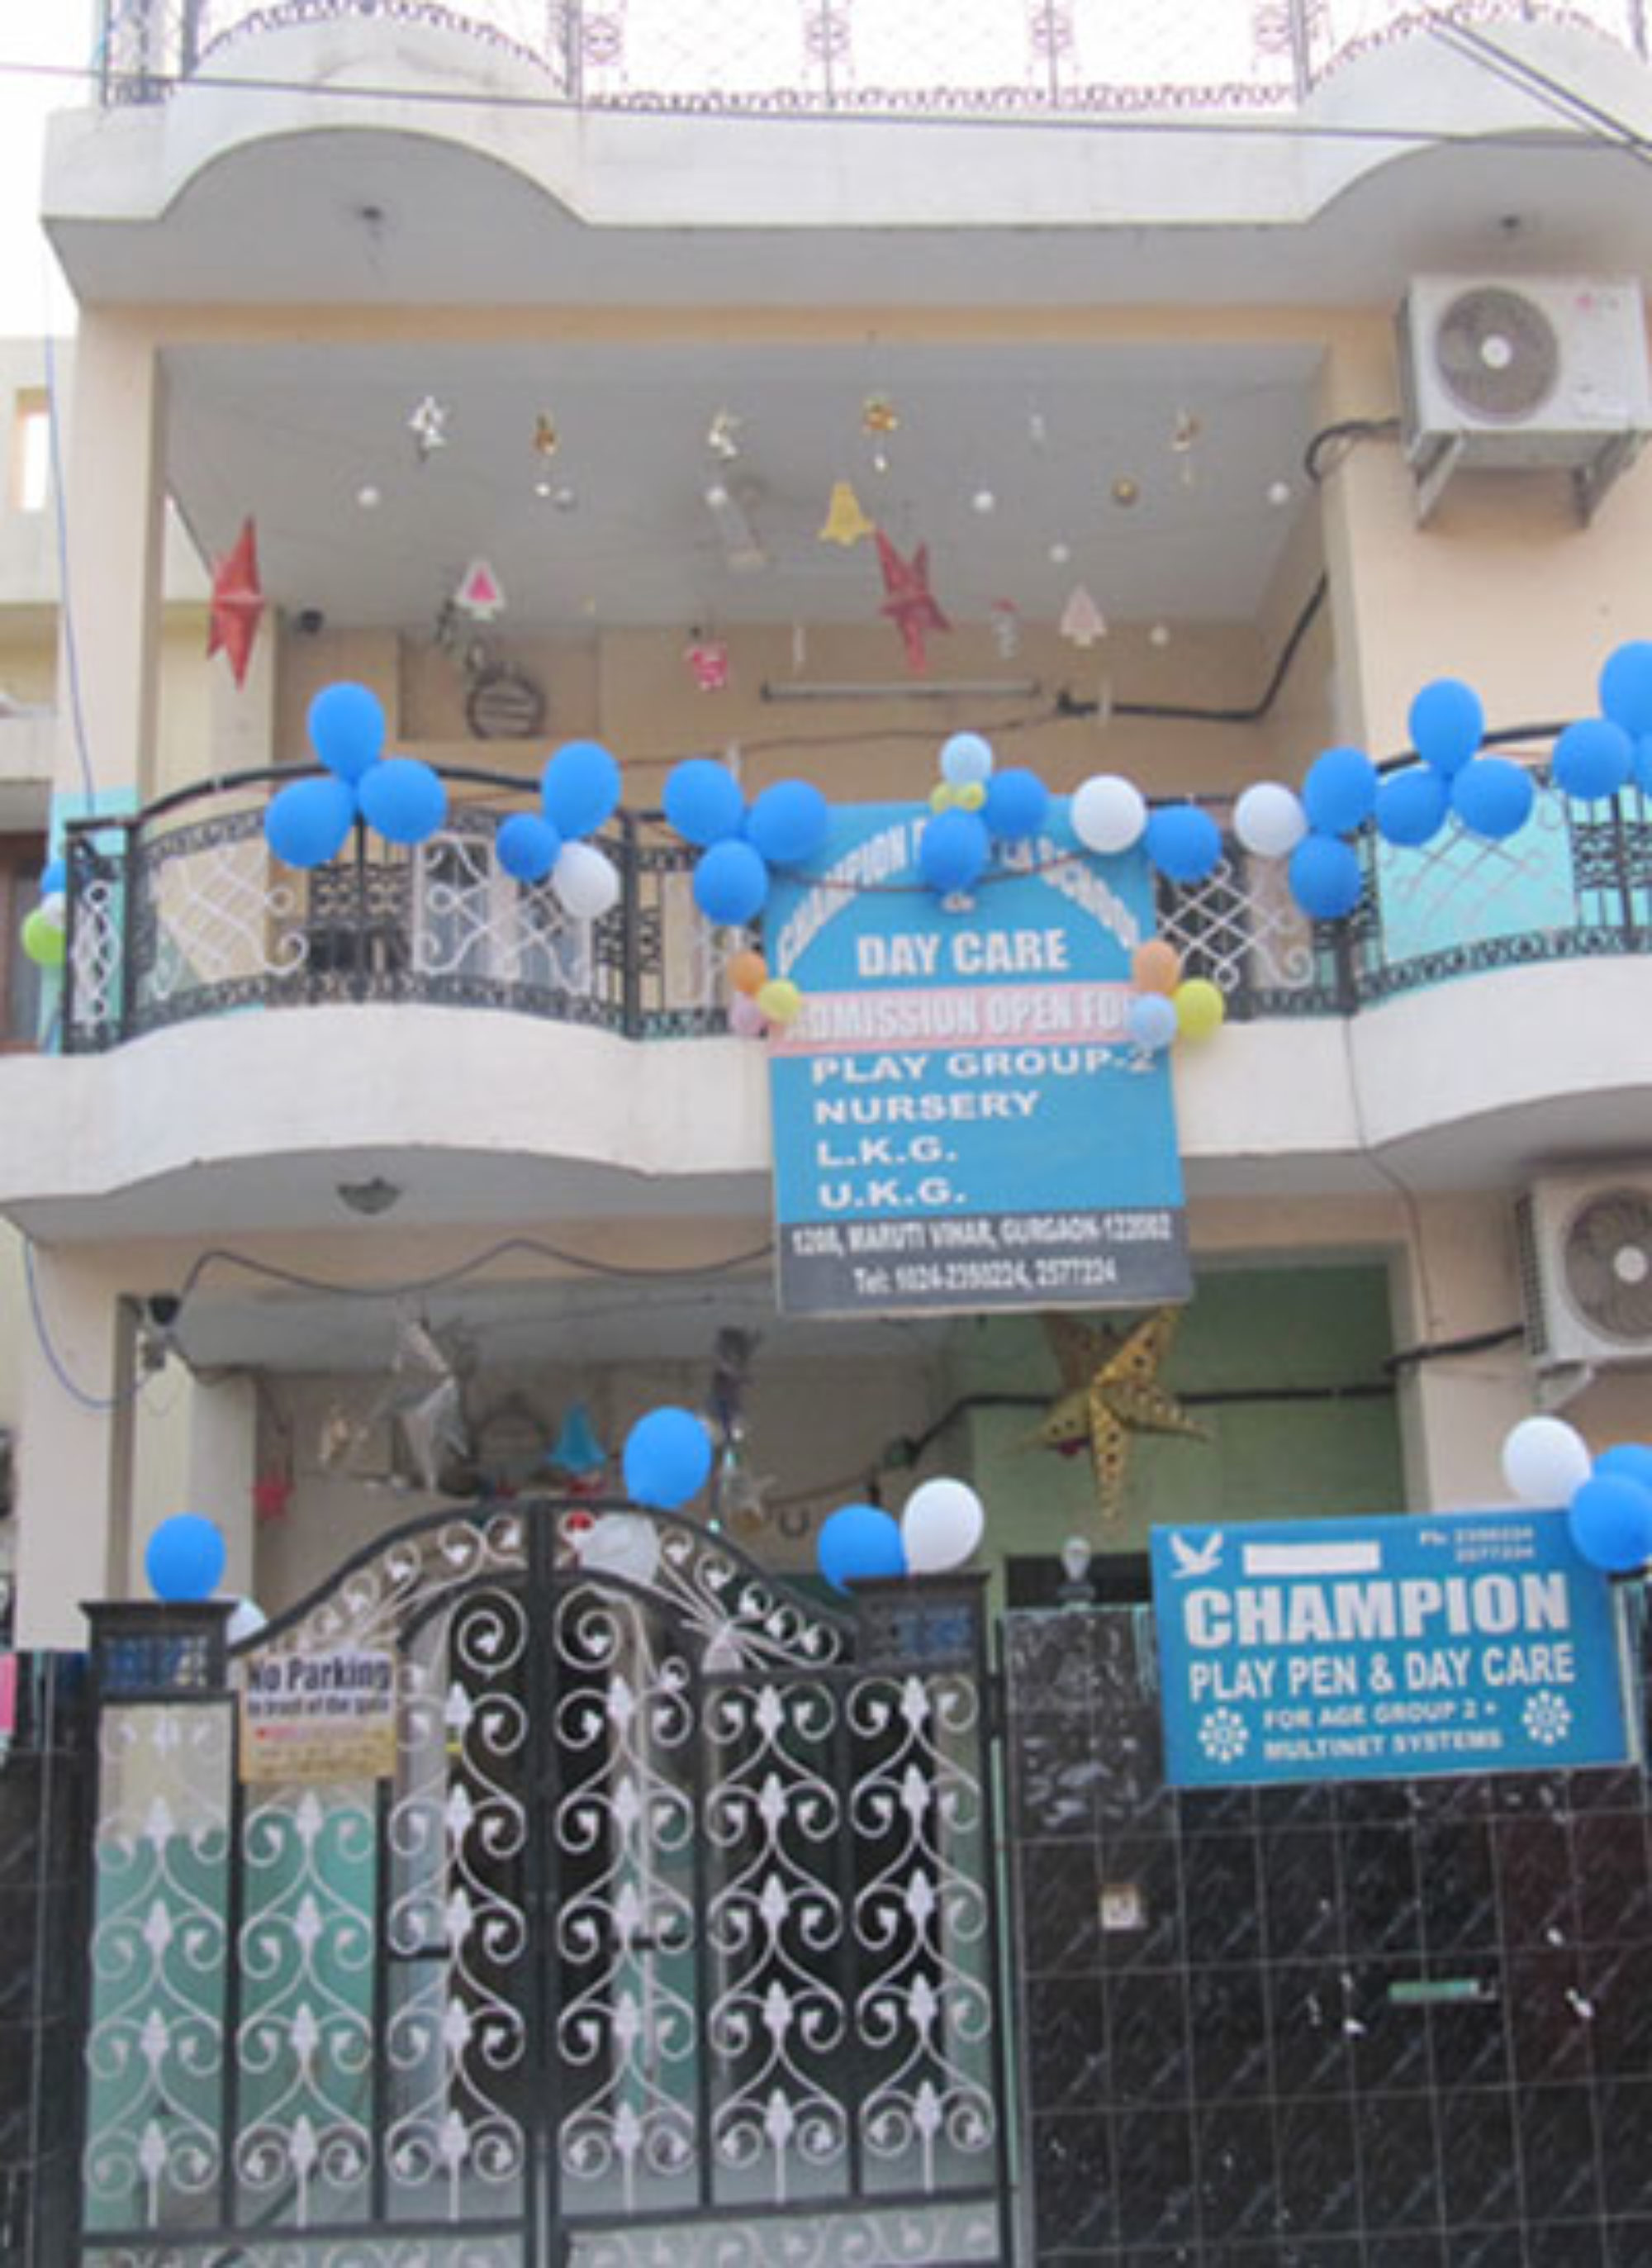 CHAMPION PLAY PEN SCHOOL AND DAYCARE